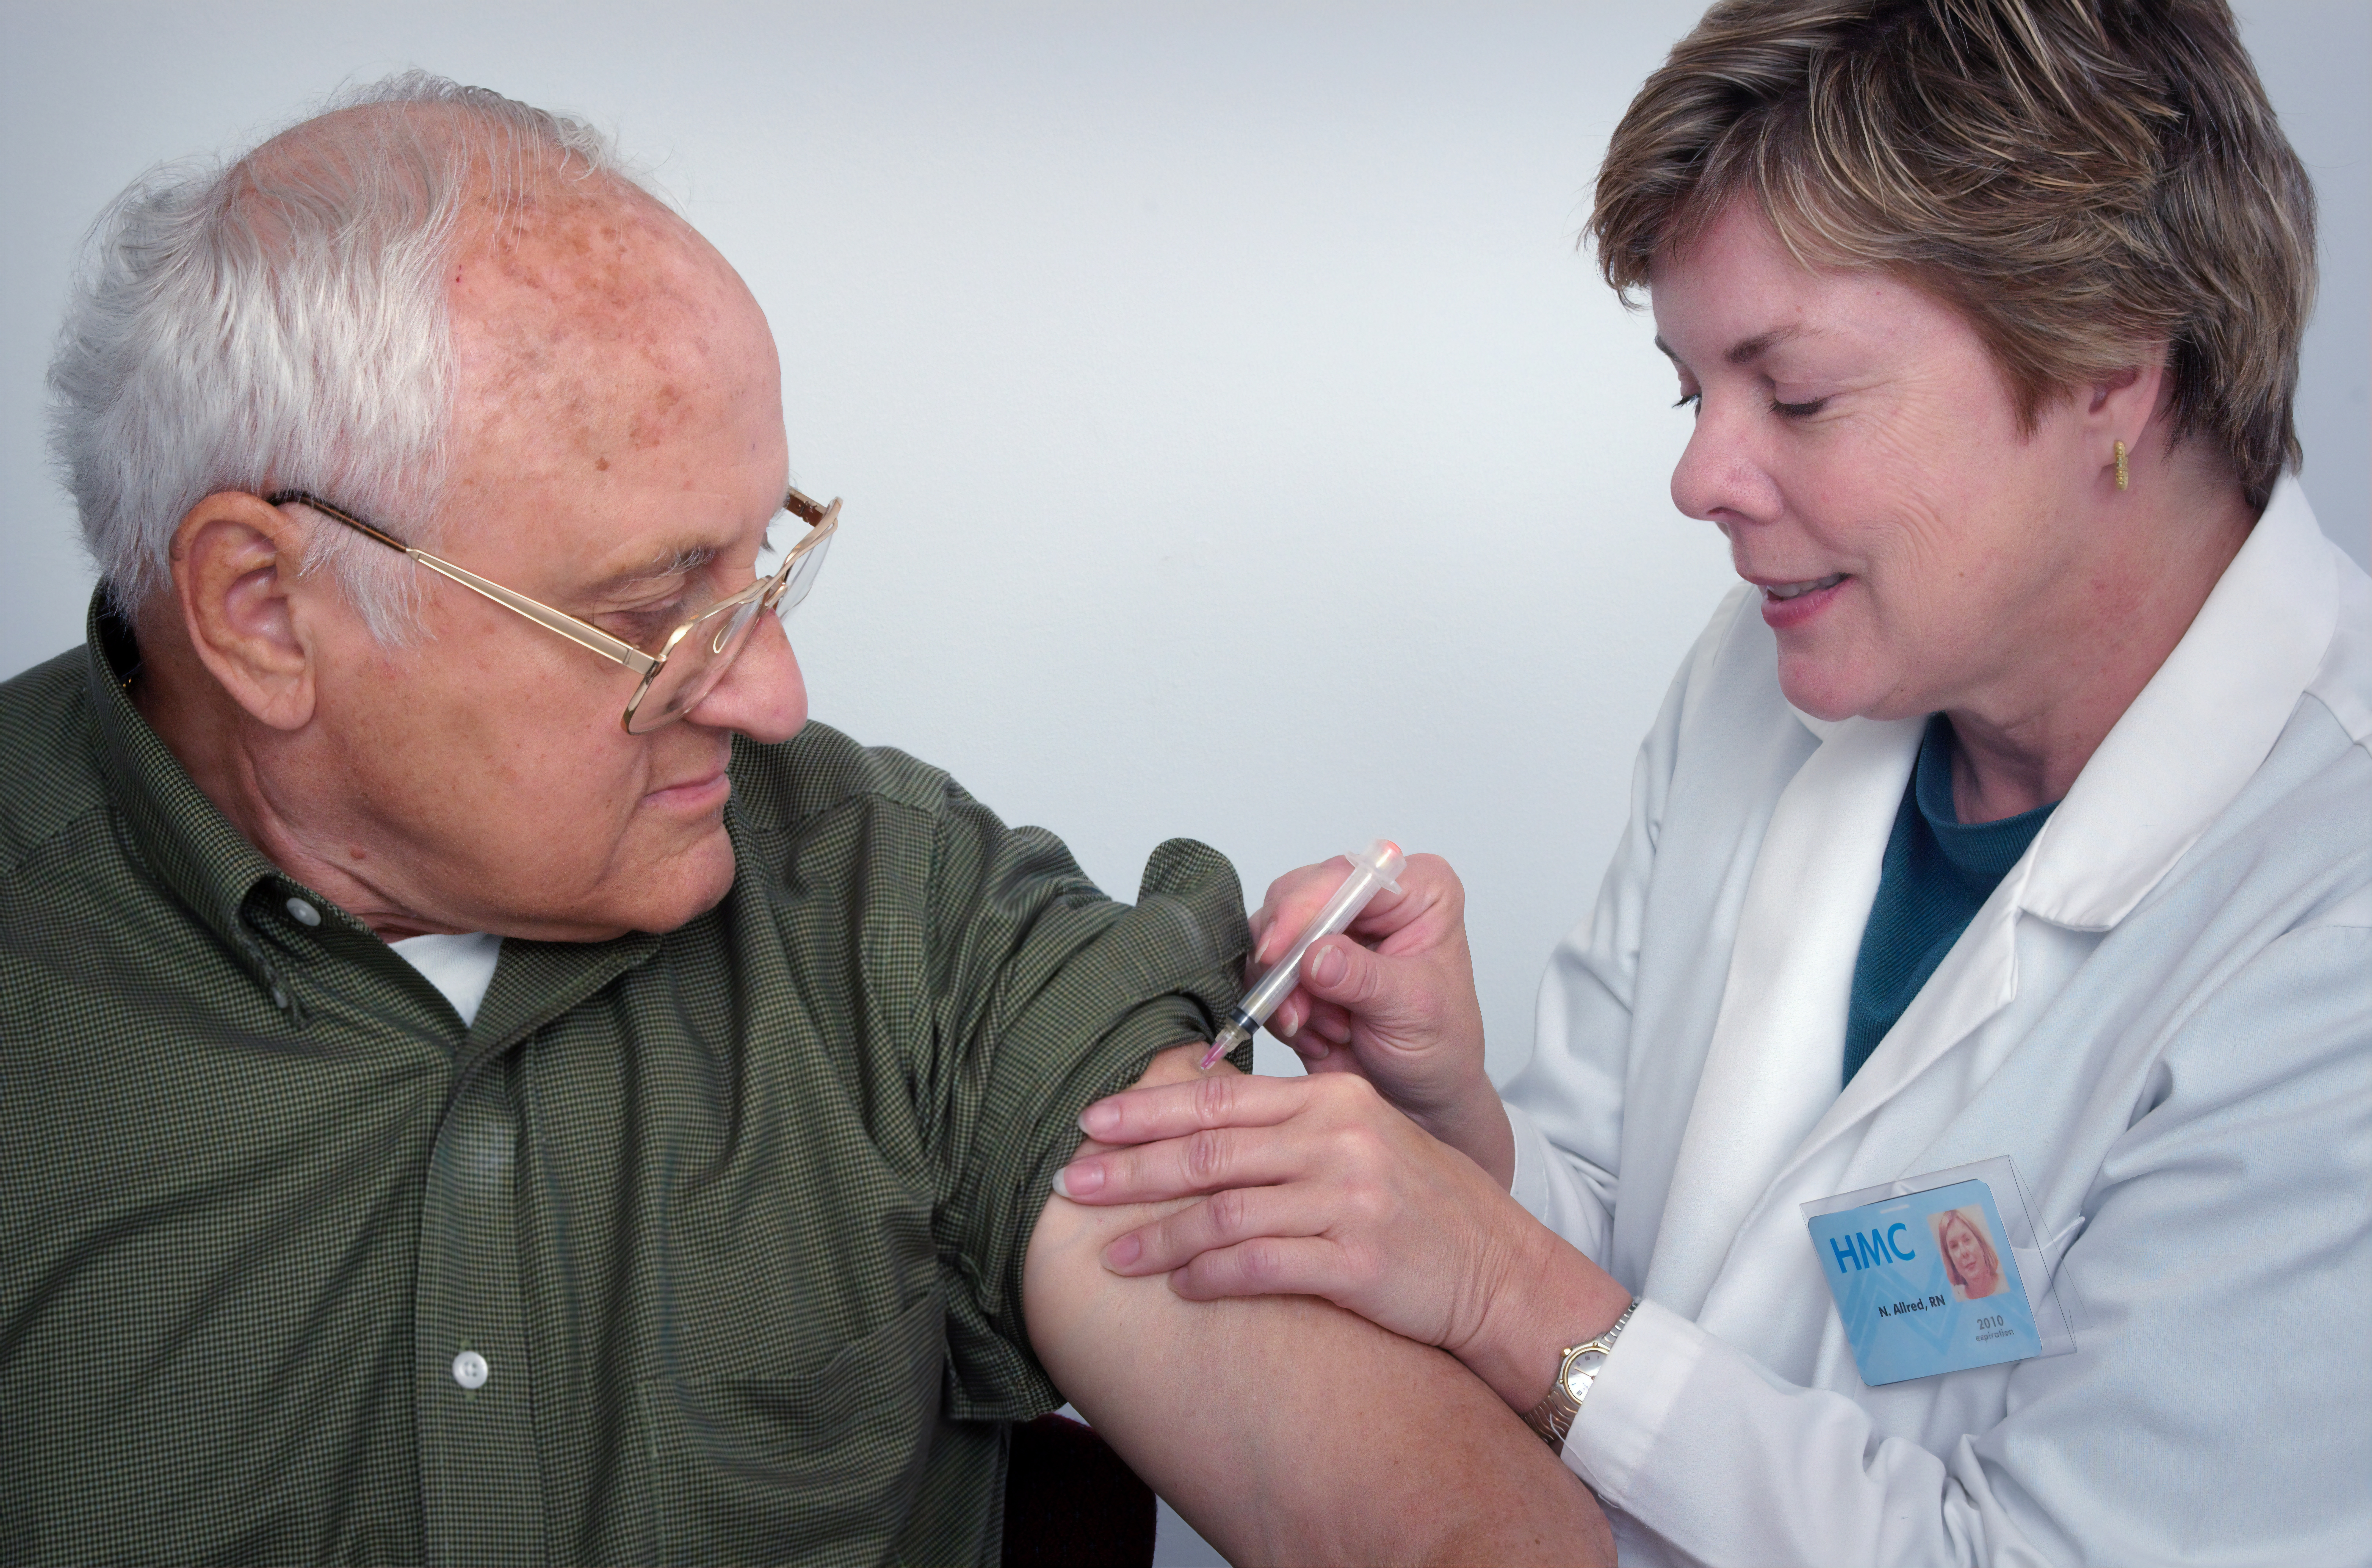 Doctor administering injection to patient; image by CDC, via Unsplash.com.